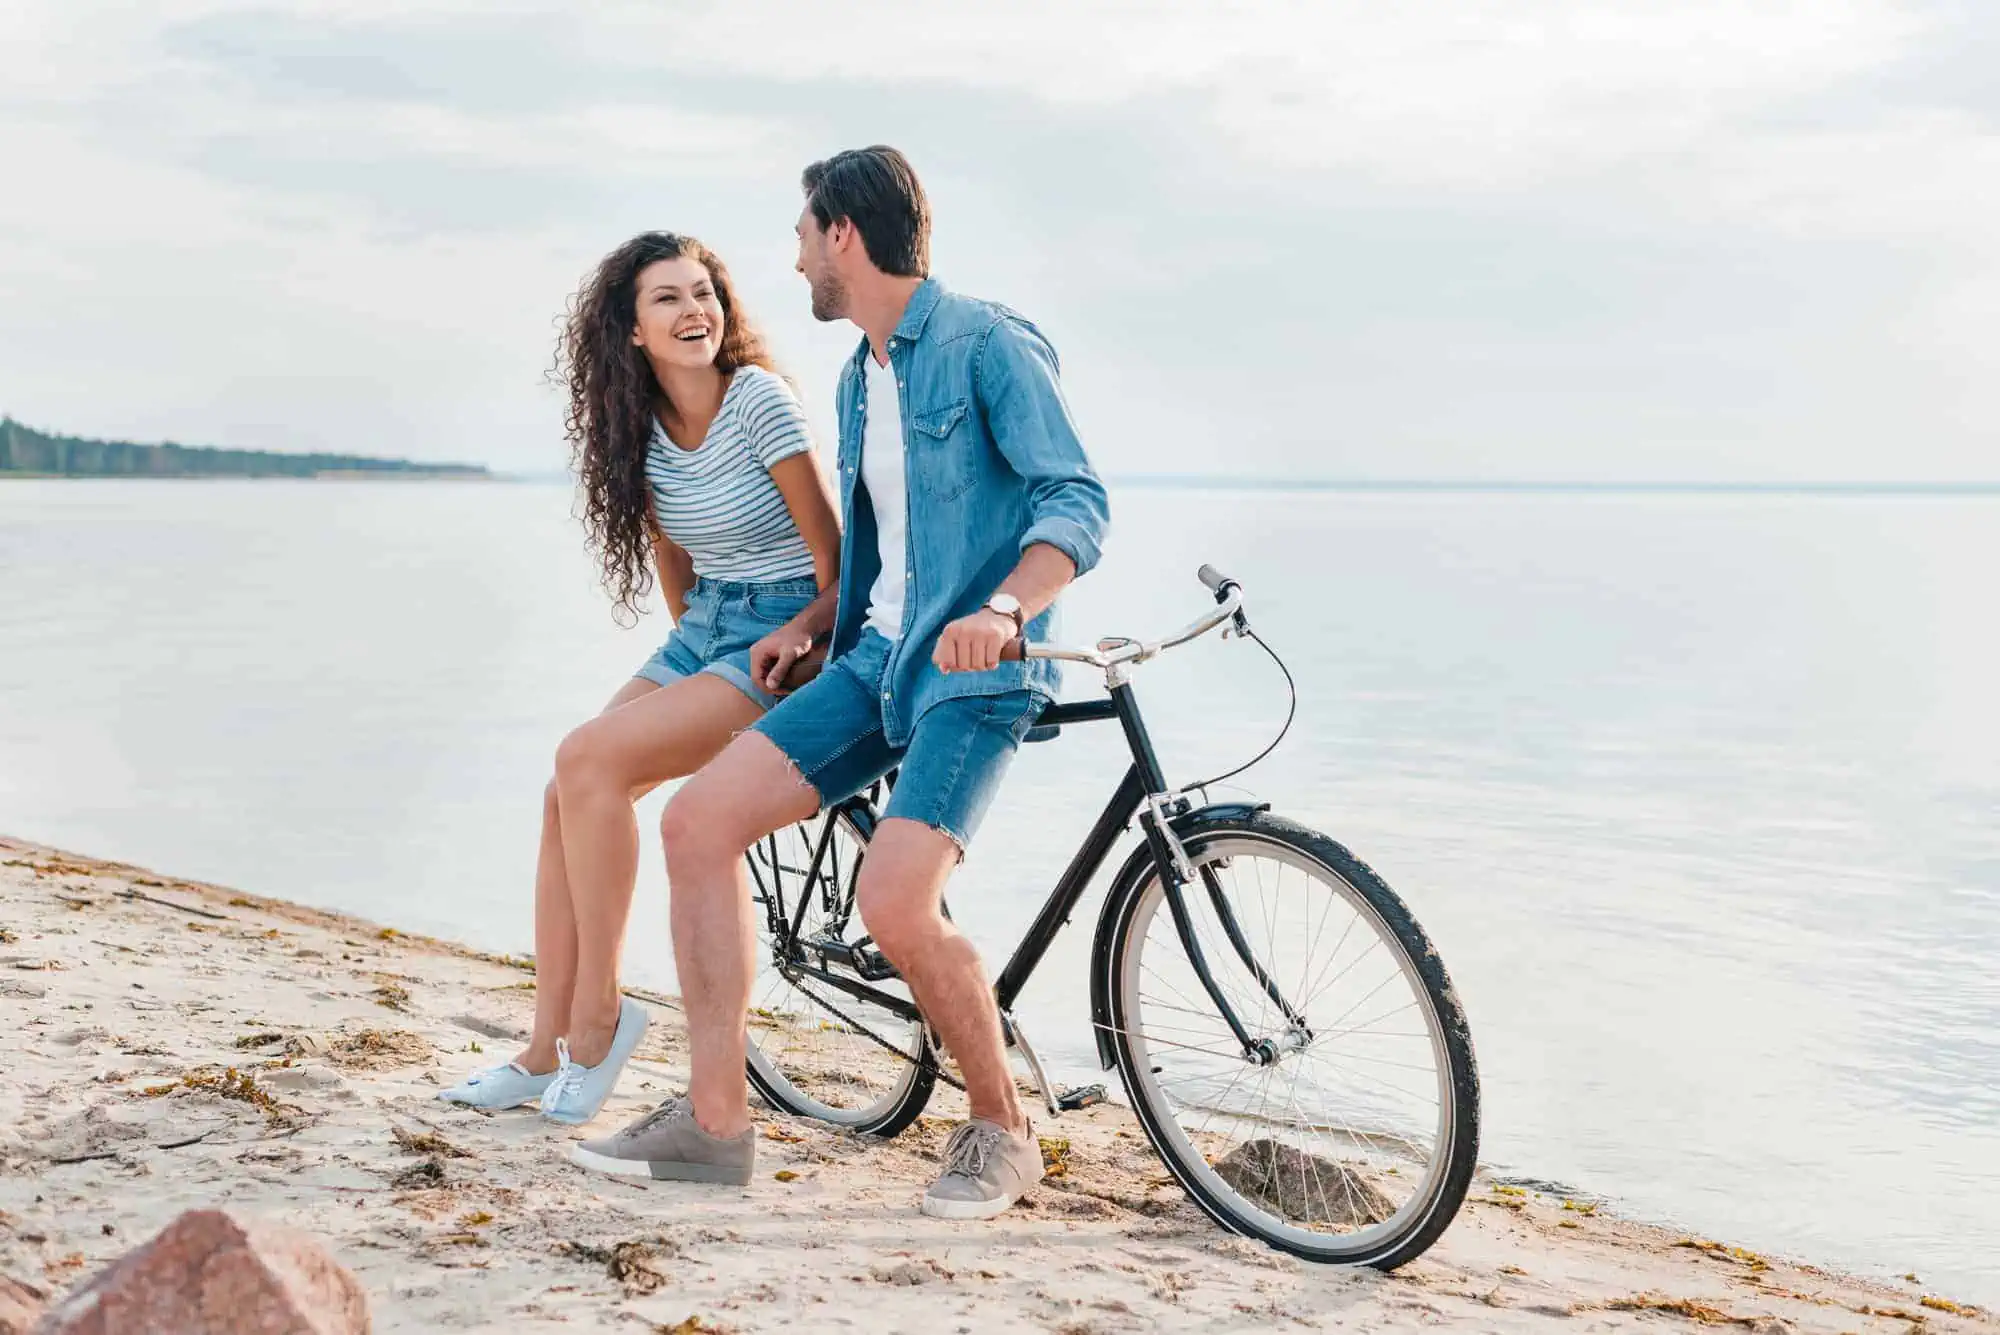 A man and a woman riding a bike on the beach